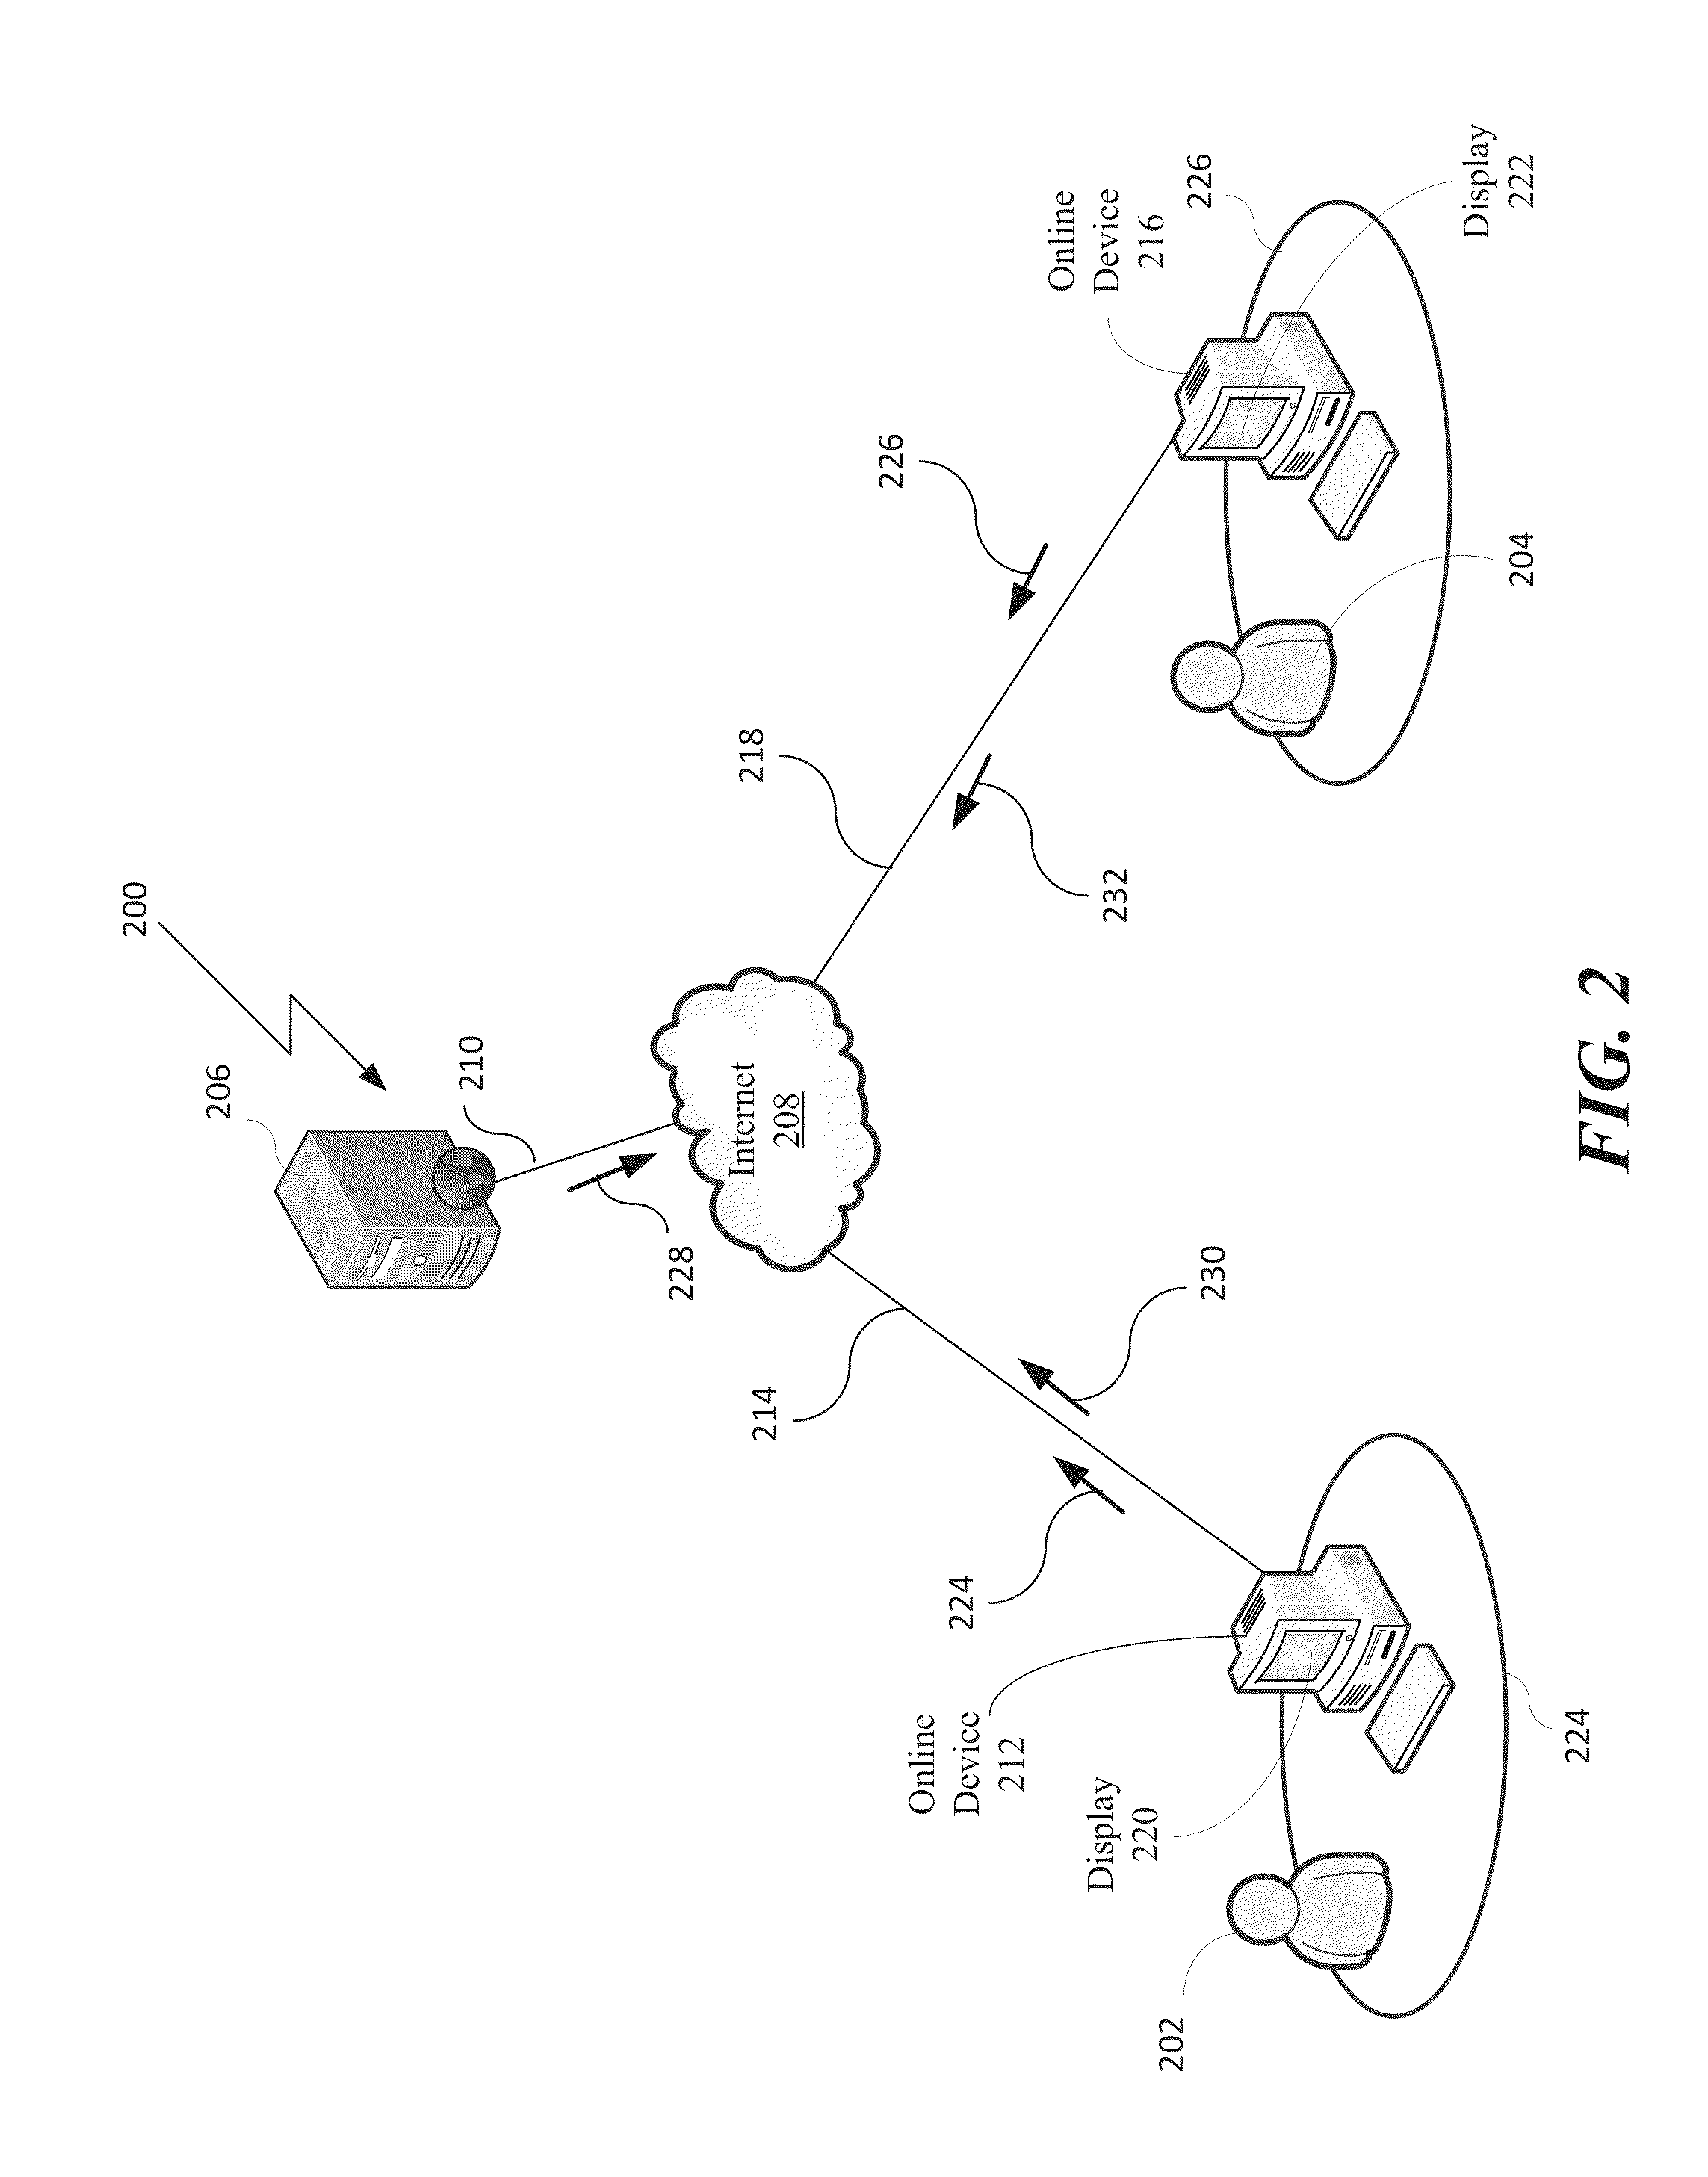 System for facilitating in-person interaction between multi-user virtual environment users whose avatars have interacted virtually